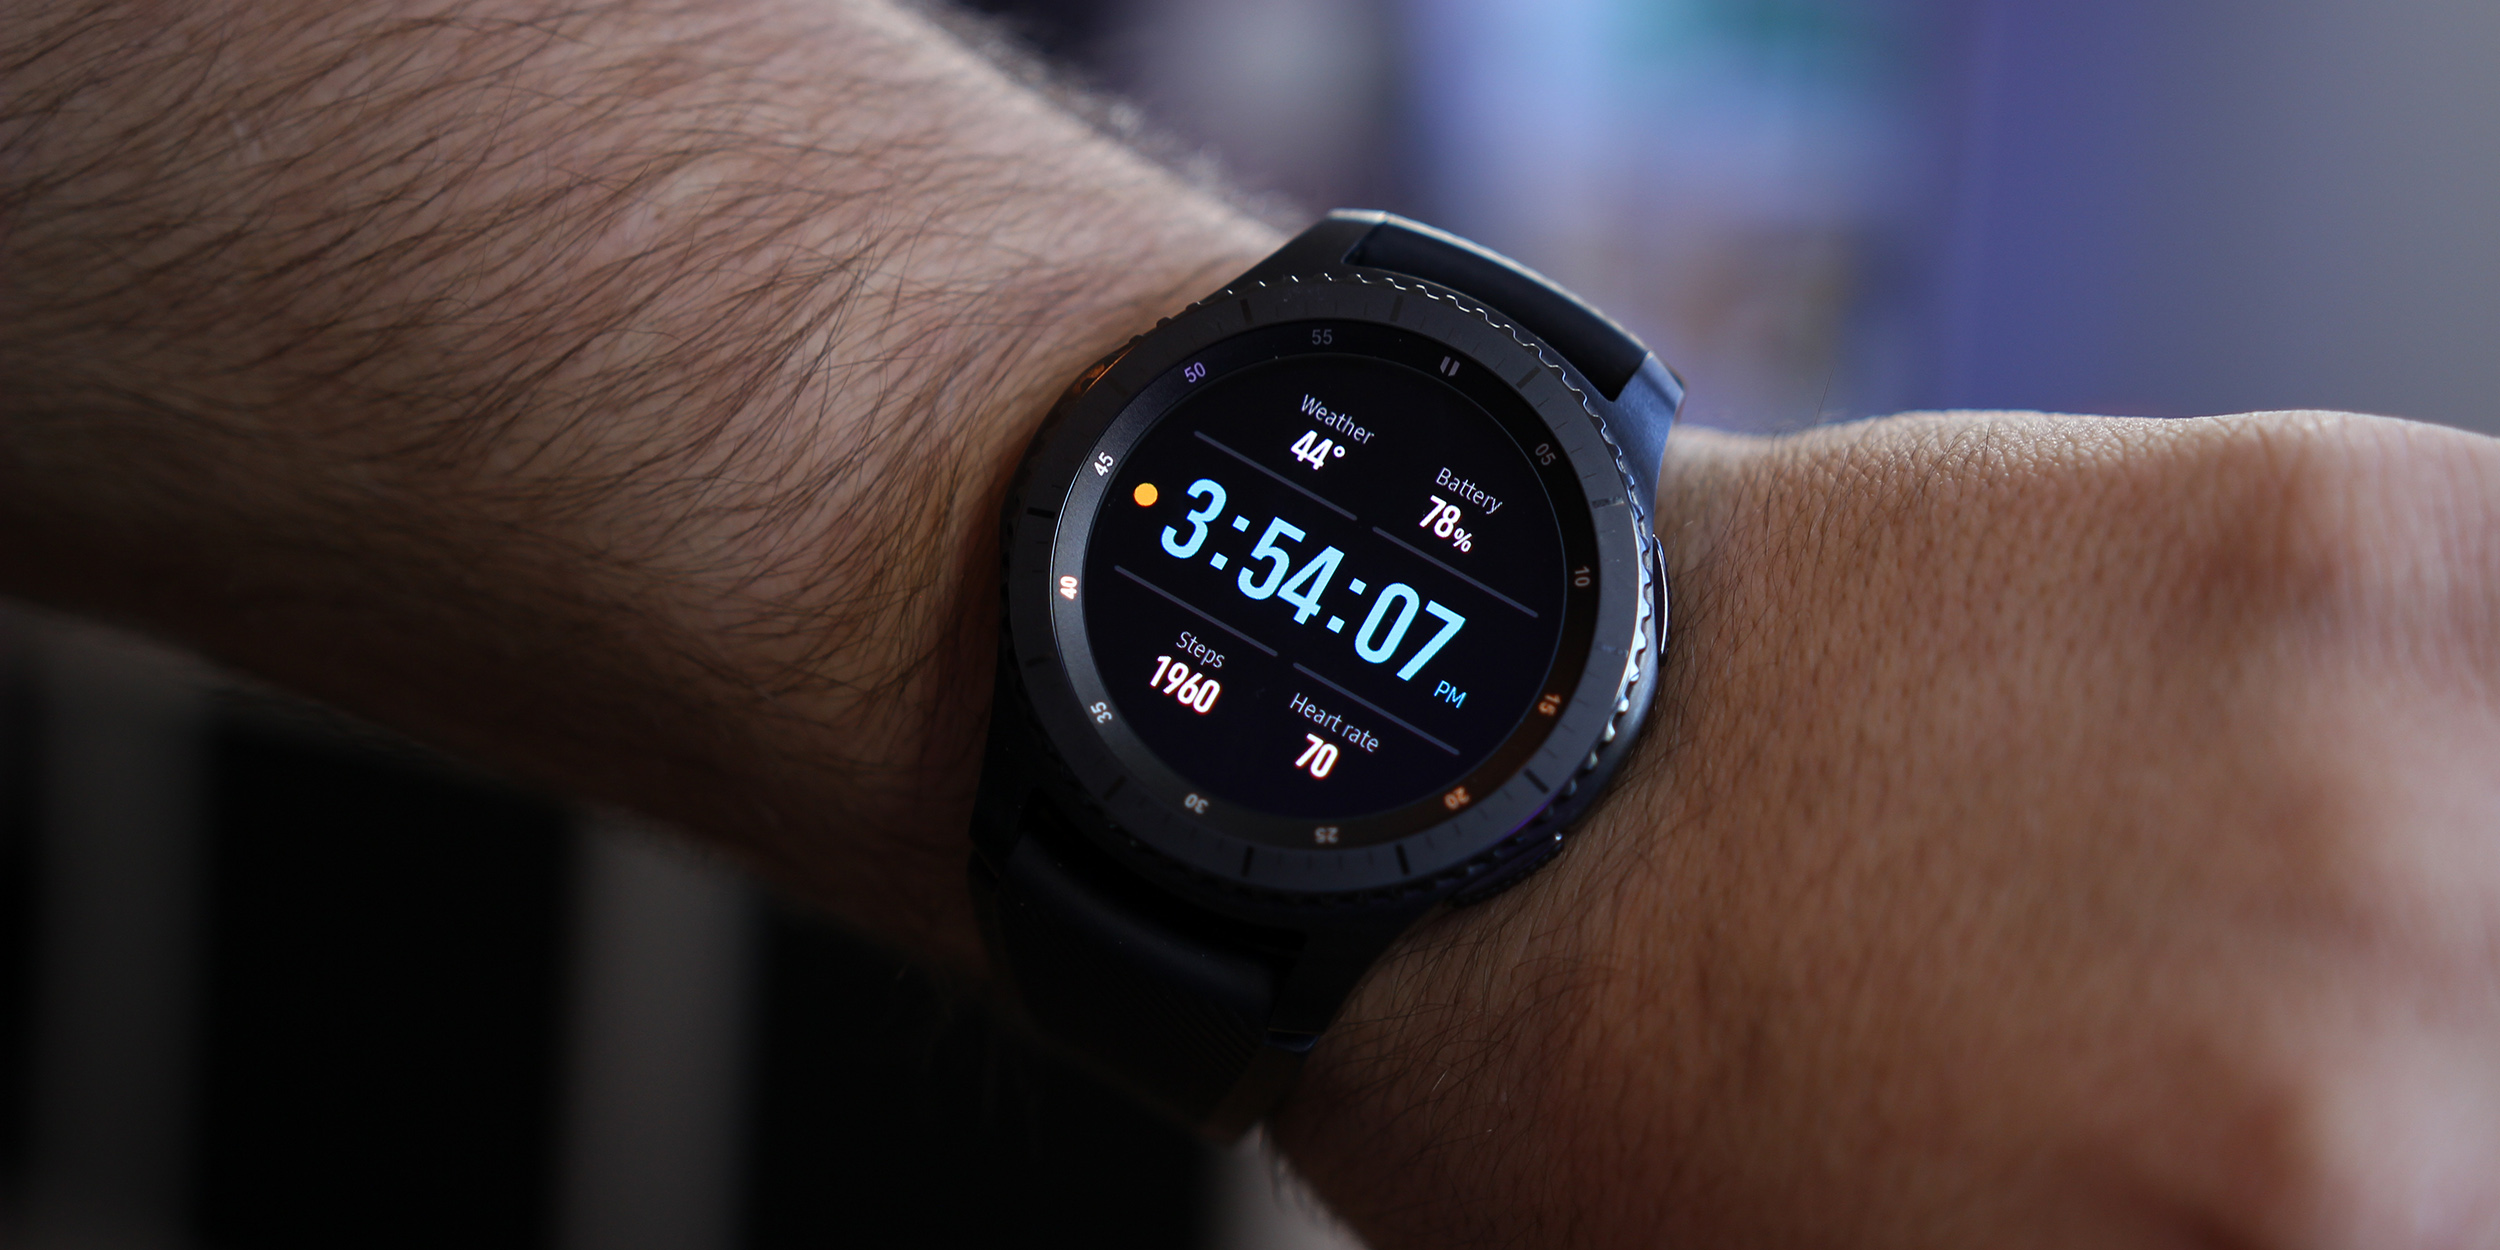 Samsung Gear S3 Review: This is the smartwatch of the future we've